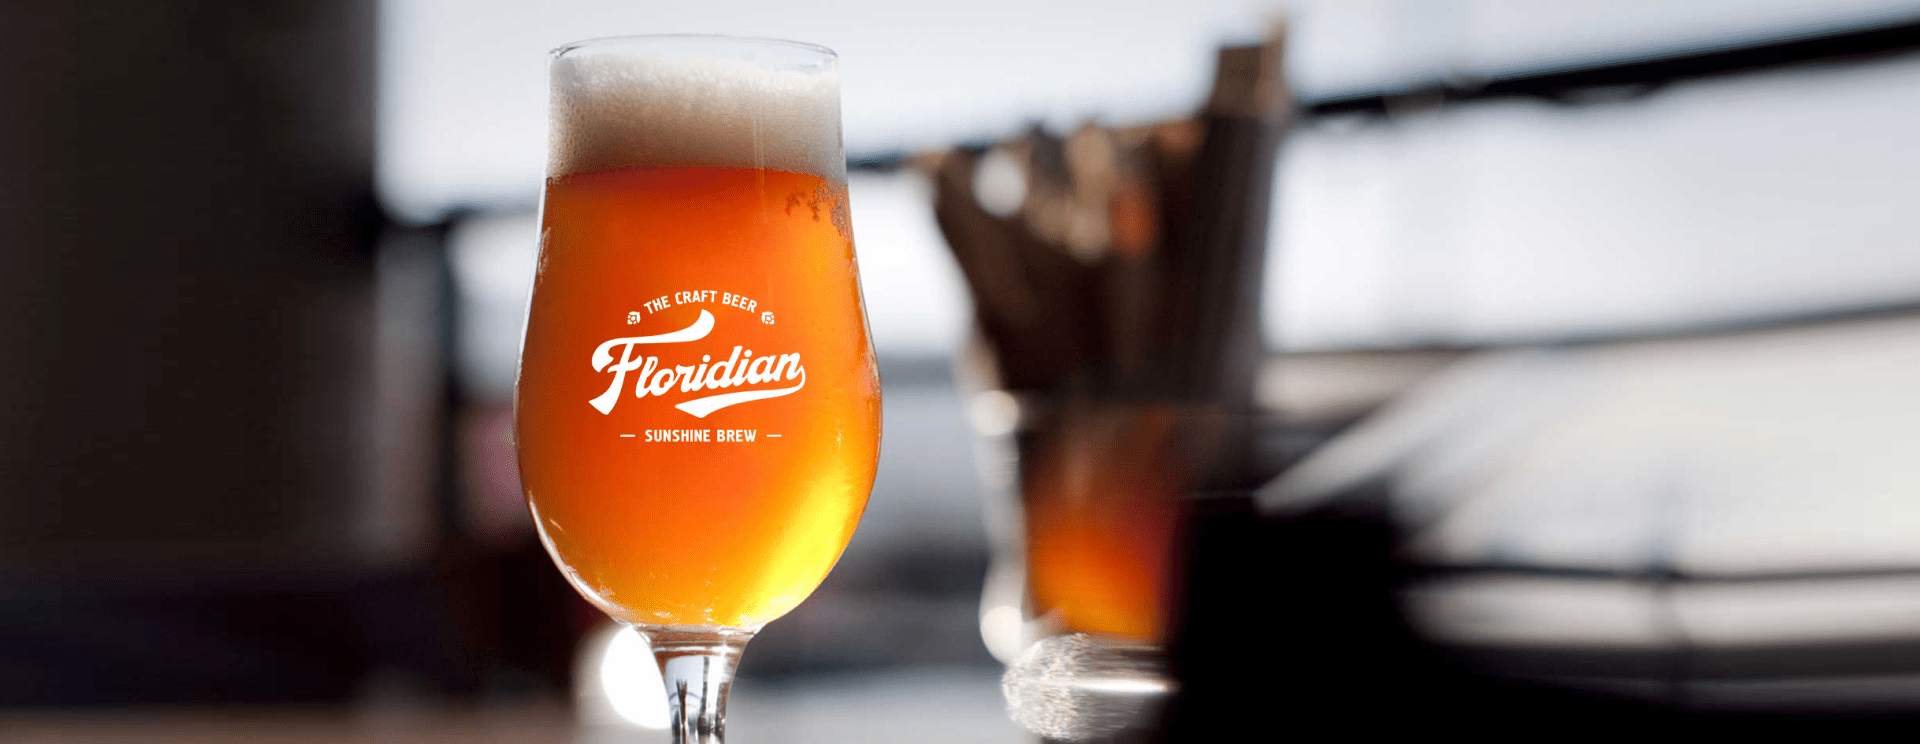 Case: development of brand components for a producer of  craft beer Floridian — Rubarb - Image - 1